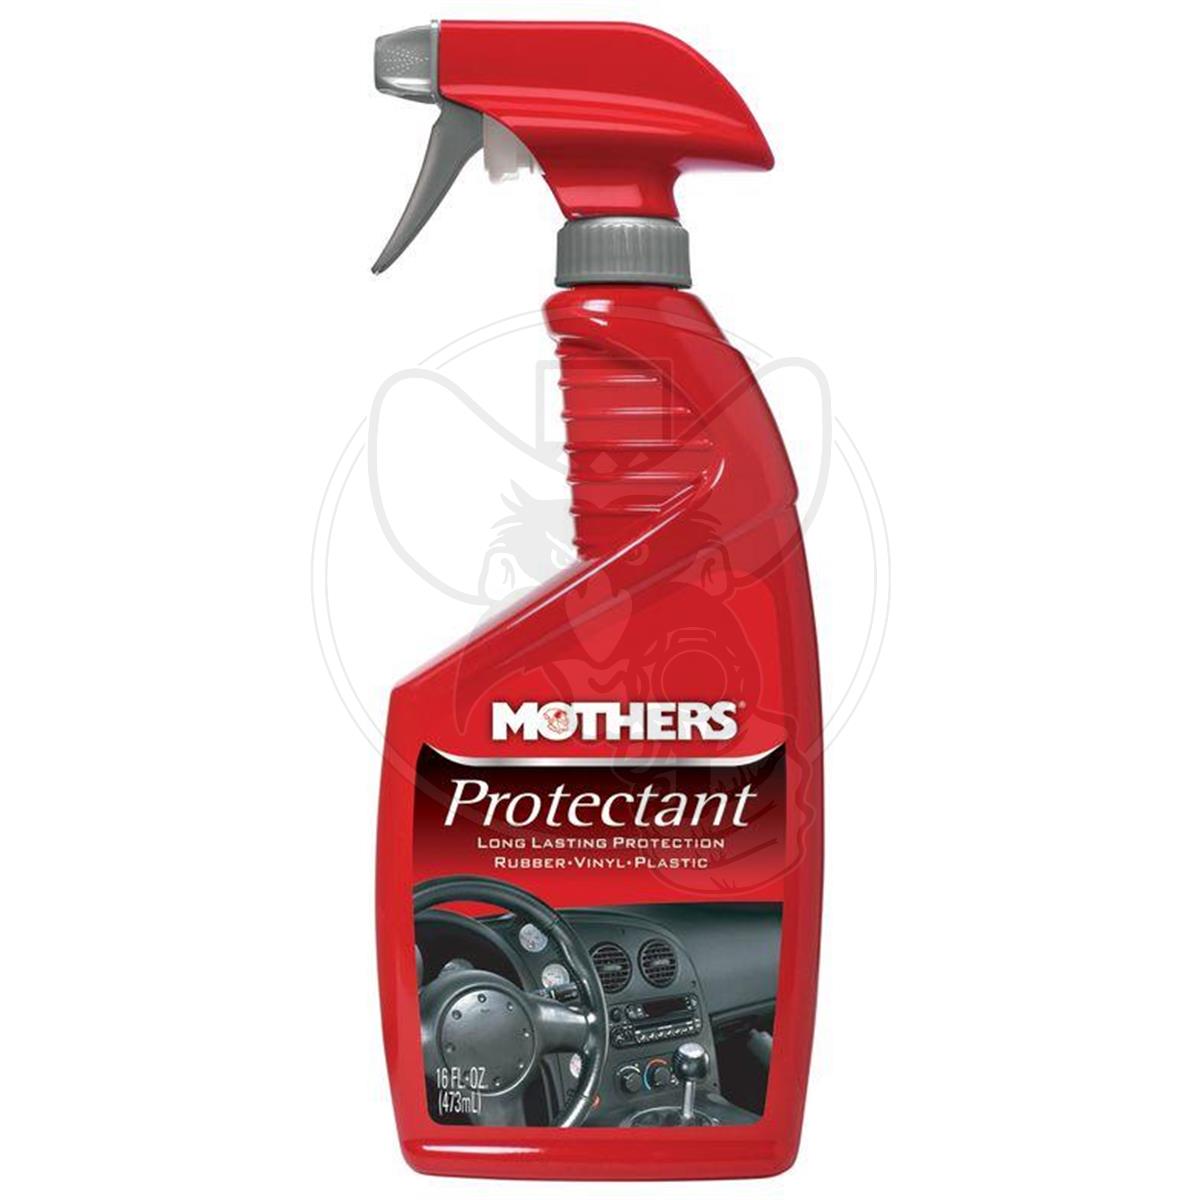 MOTHERS PROTECTANT 473ML